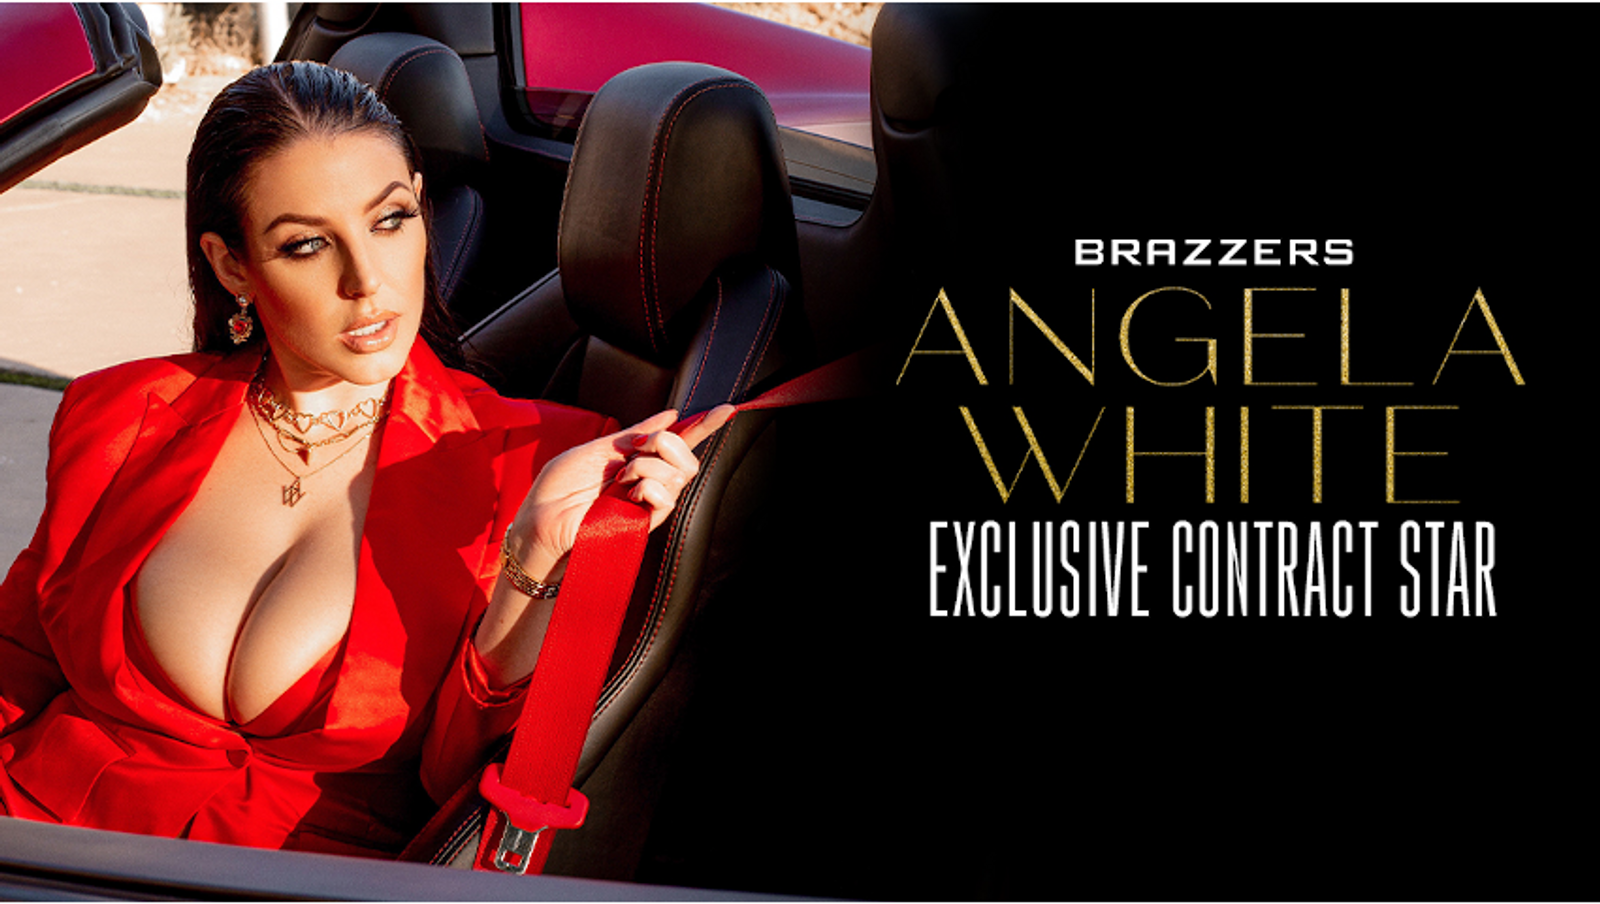 Angela White Signs Exclusive Contract With Brazzers